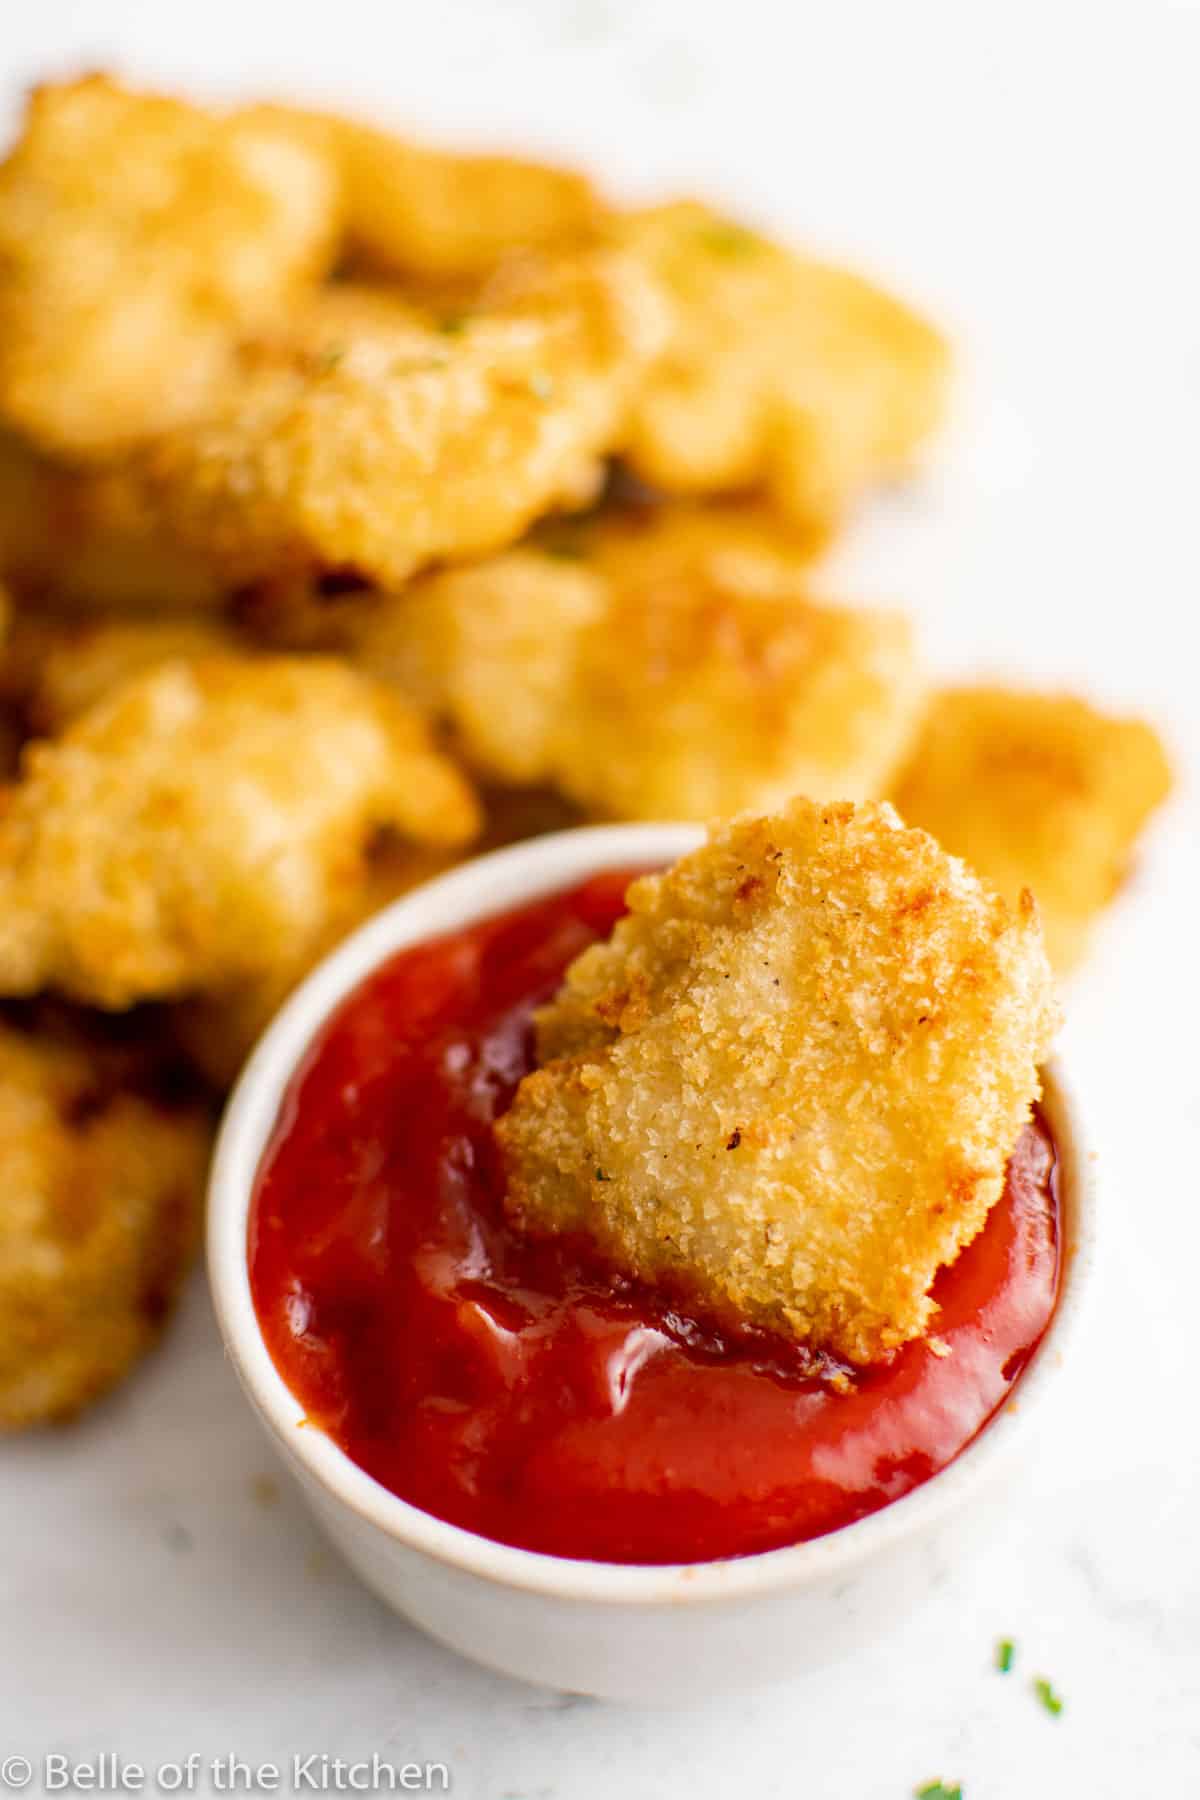 a piece of chicken dunked in a dish of ketchup.